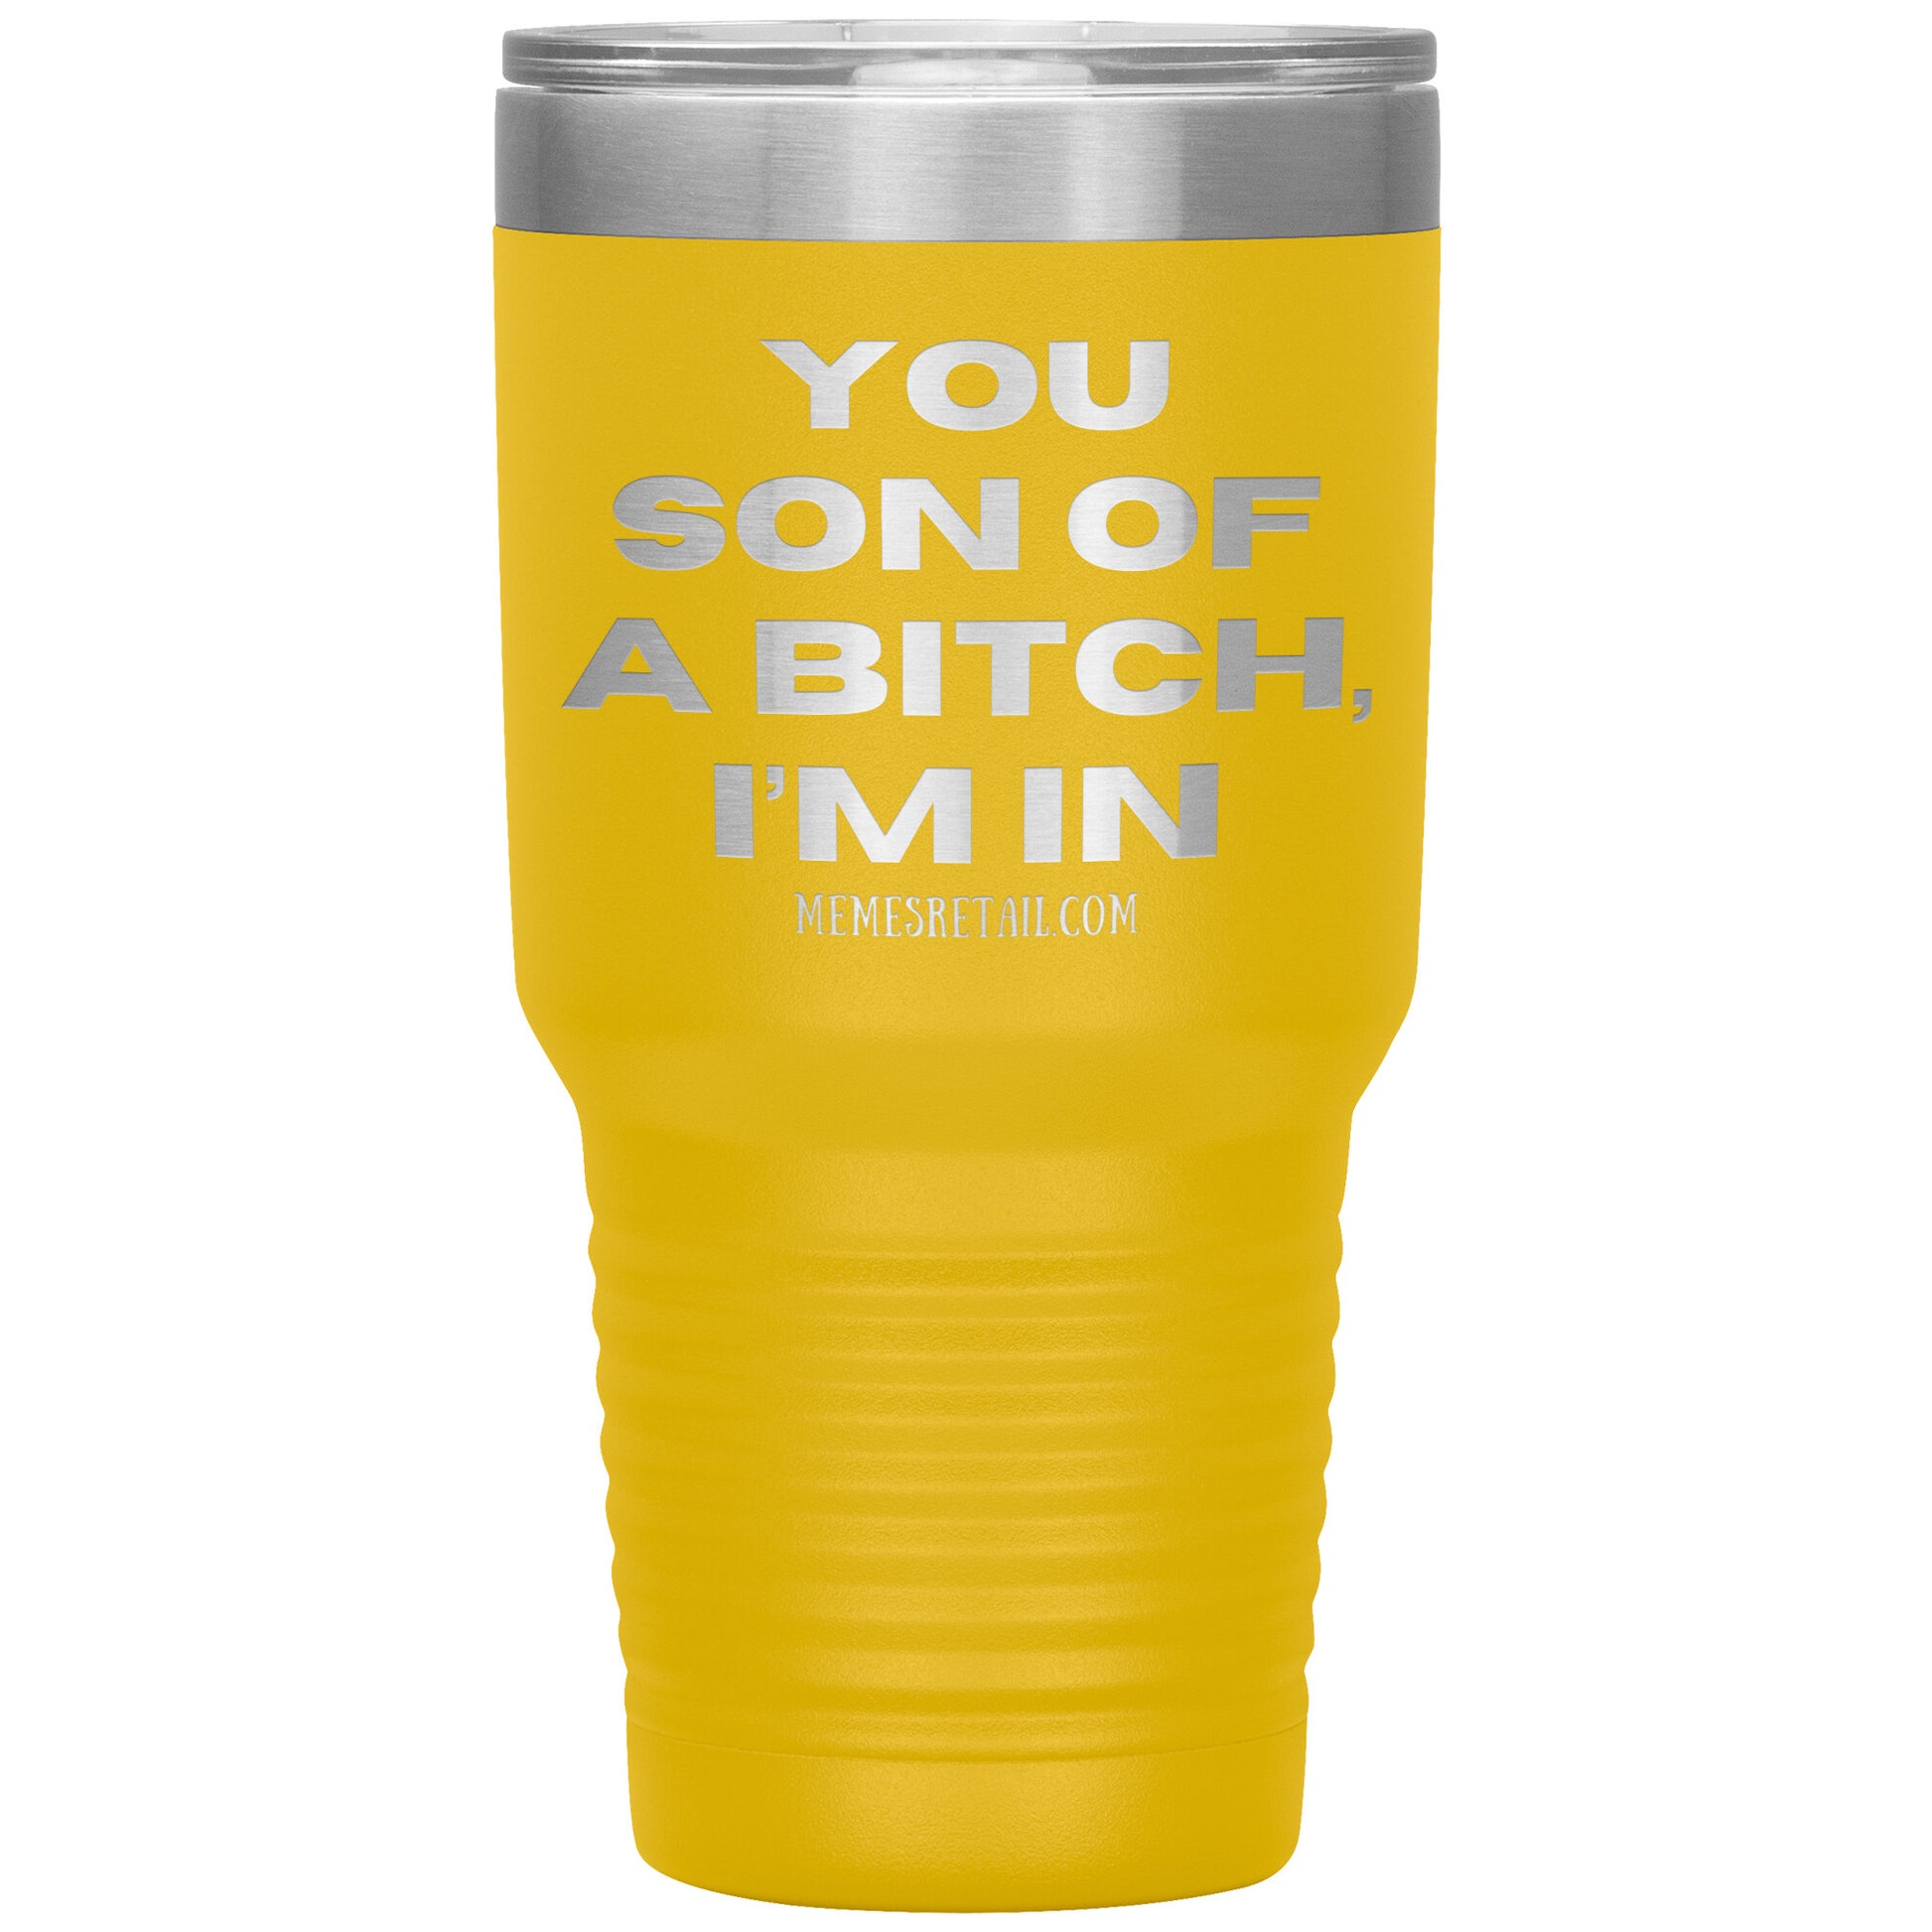 You son of a bitch, I’m in Tumblers, 30oz Insulated Tumbler / Yellow - MemesRetail.com